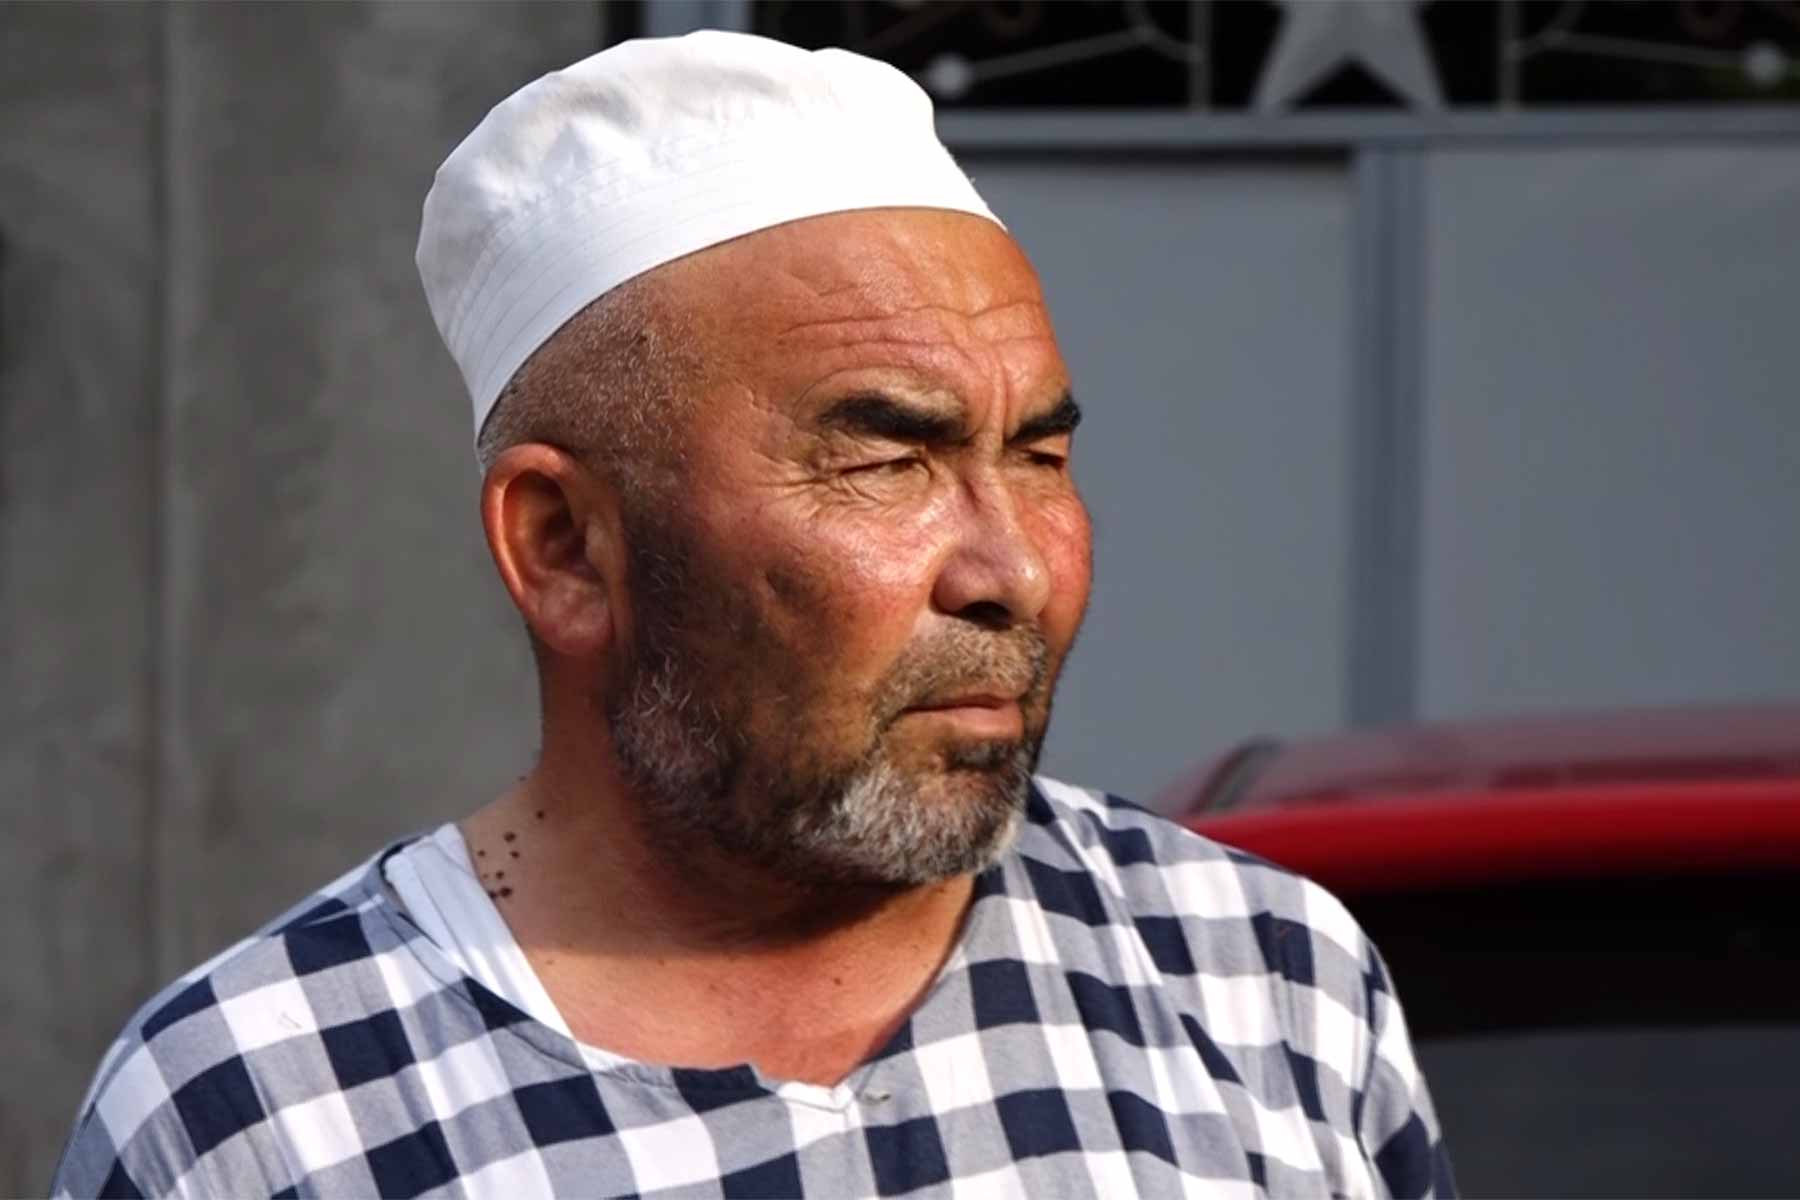 Aibek Imenov, a resident of the Aravan district in the Osh region, looked for his friend Baktyyar Kochkonbaev for two years, together with the family. Kochkonbaev lived in Aravan district and got caught in riots that spread in the area. © Daiana Daniyar kyzy